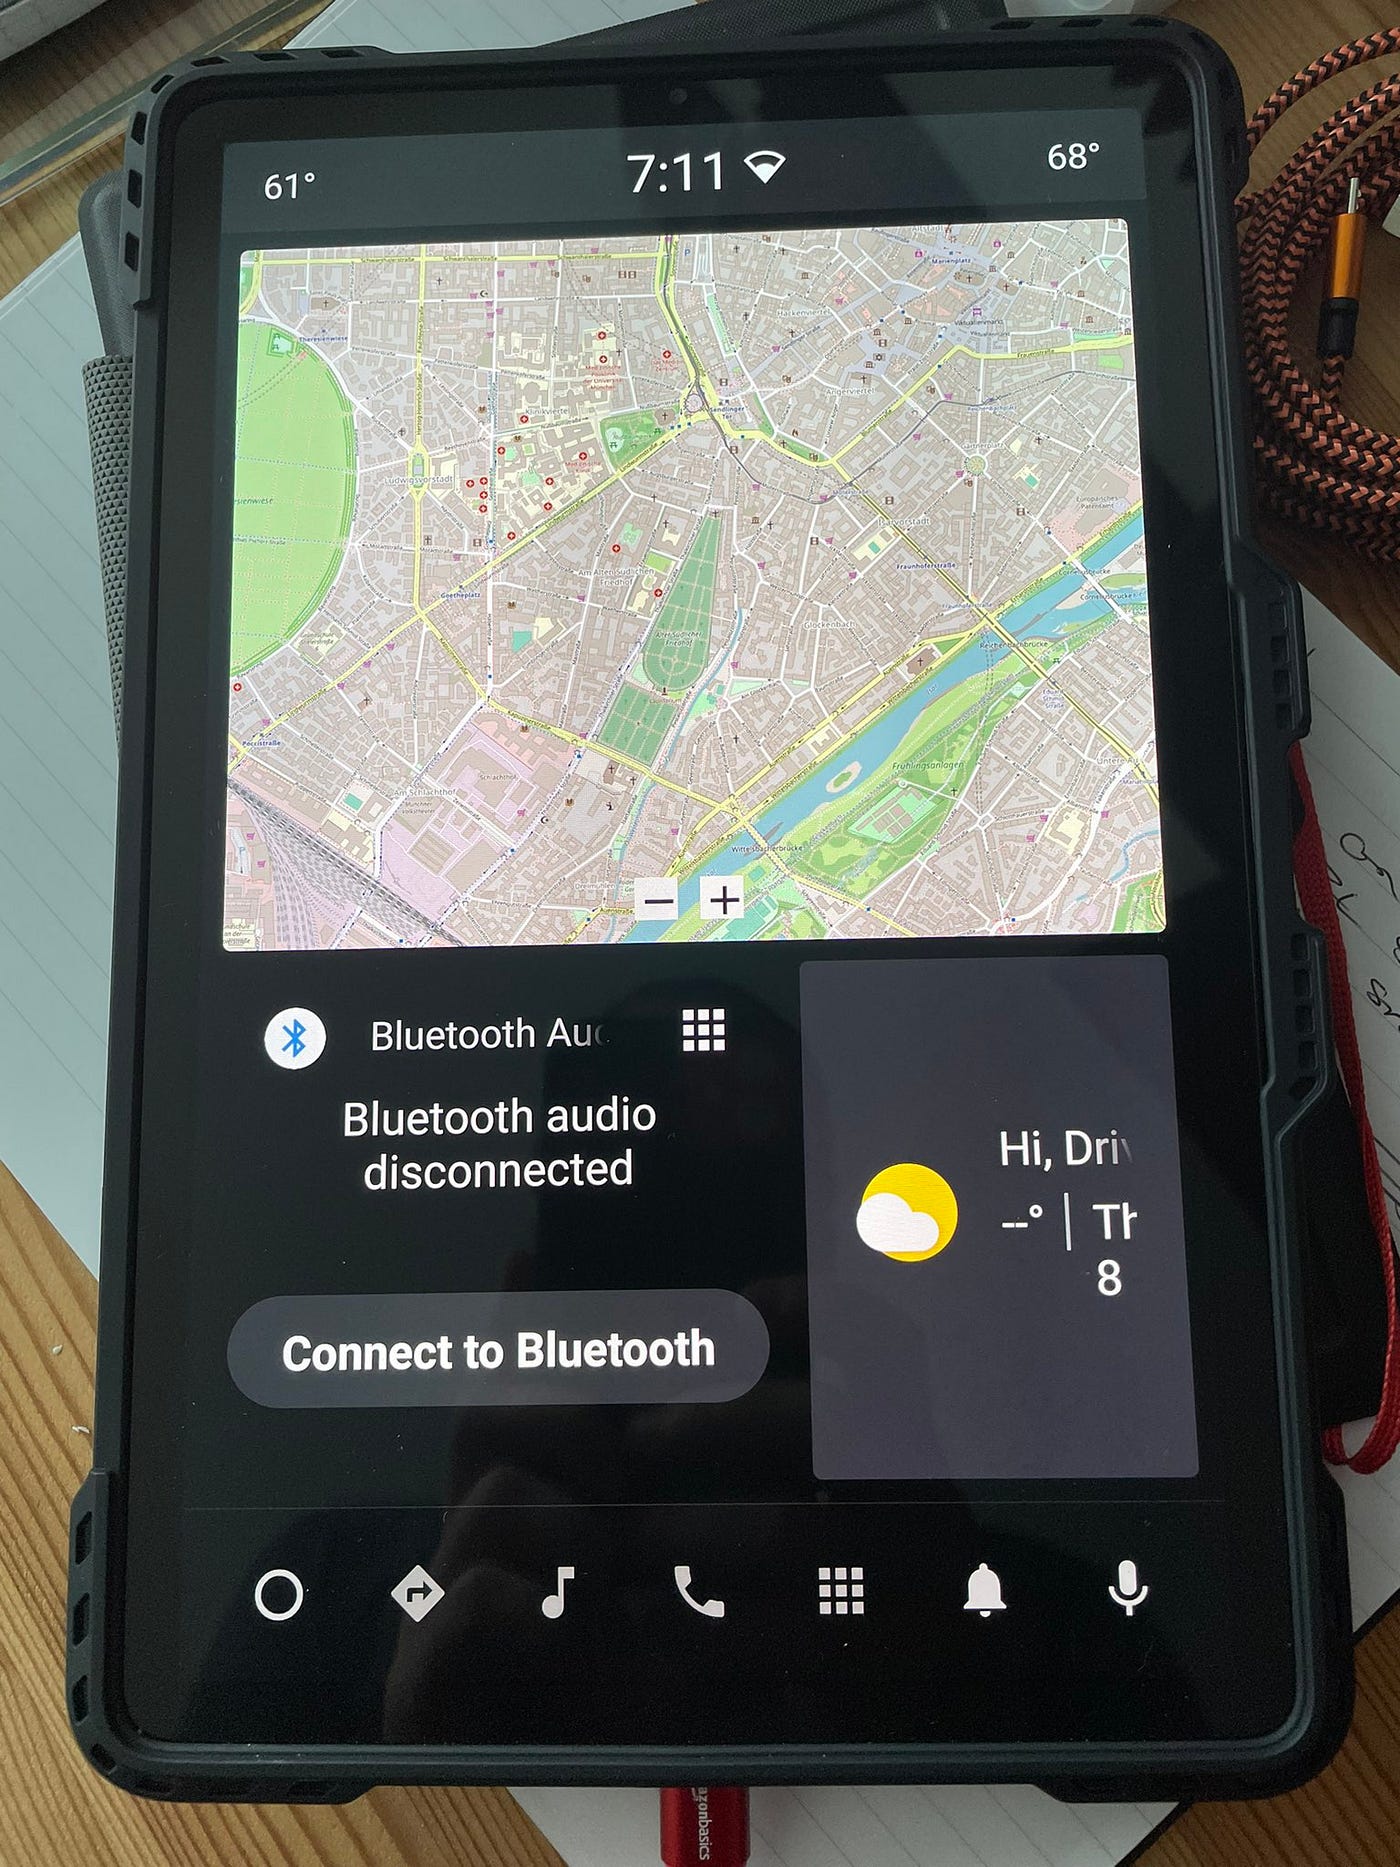 Android Automotive OS on a Tablet | by Al Sutton | Snapp Automotive | Medium